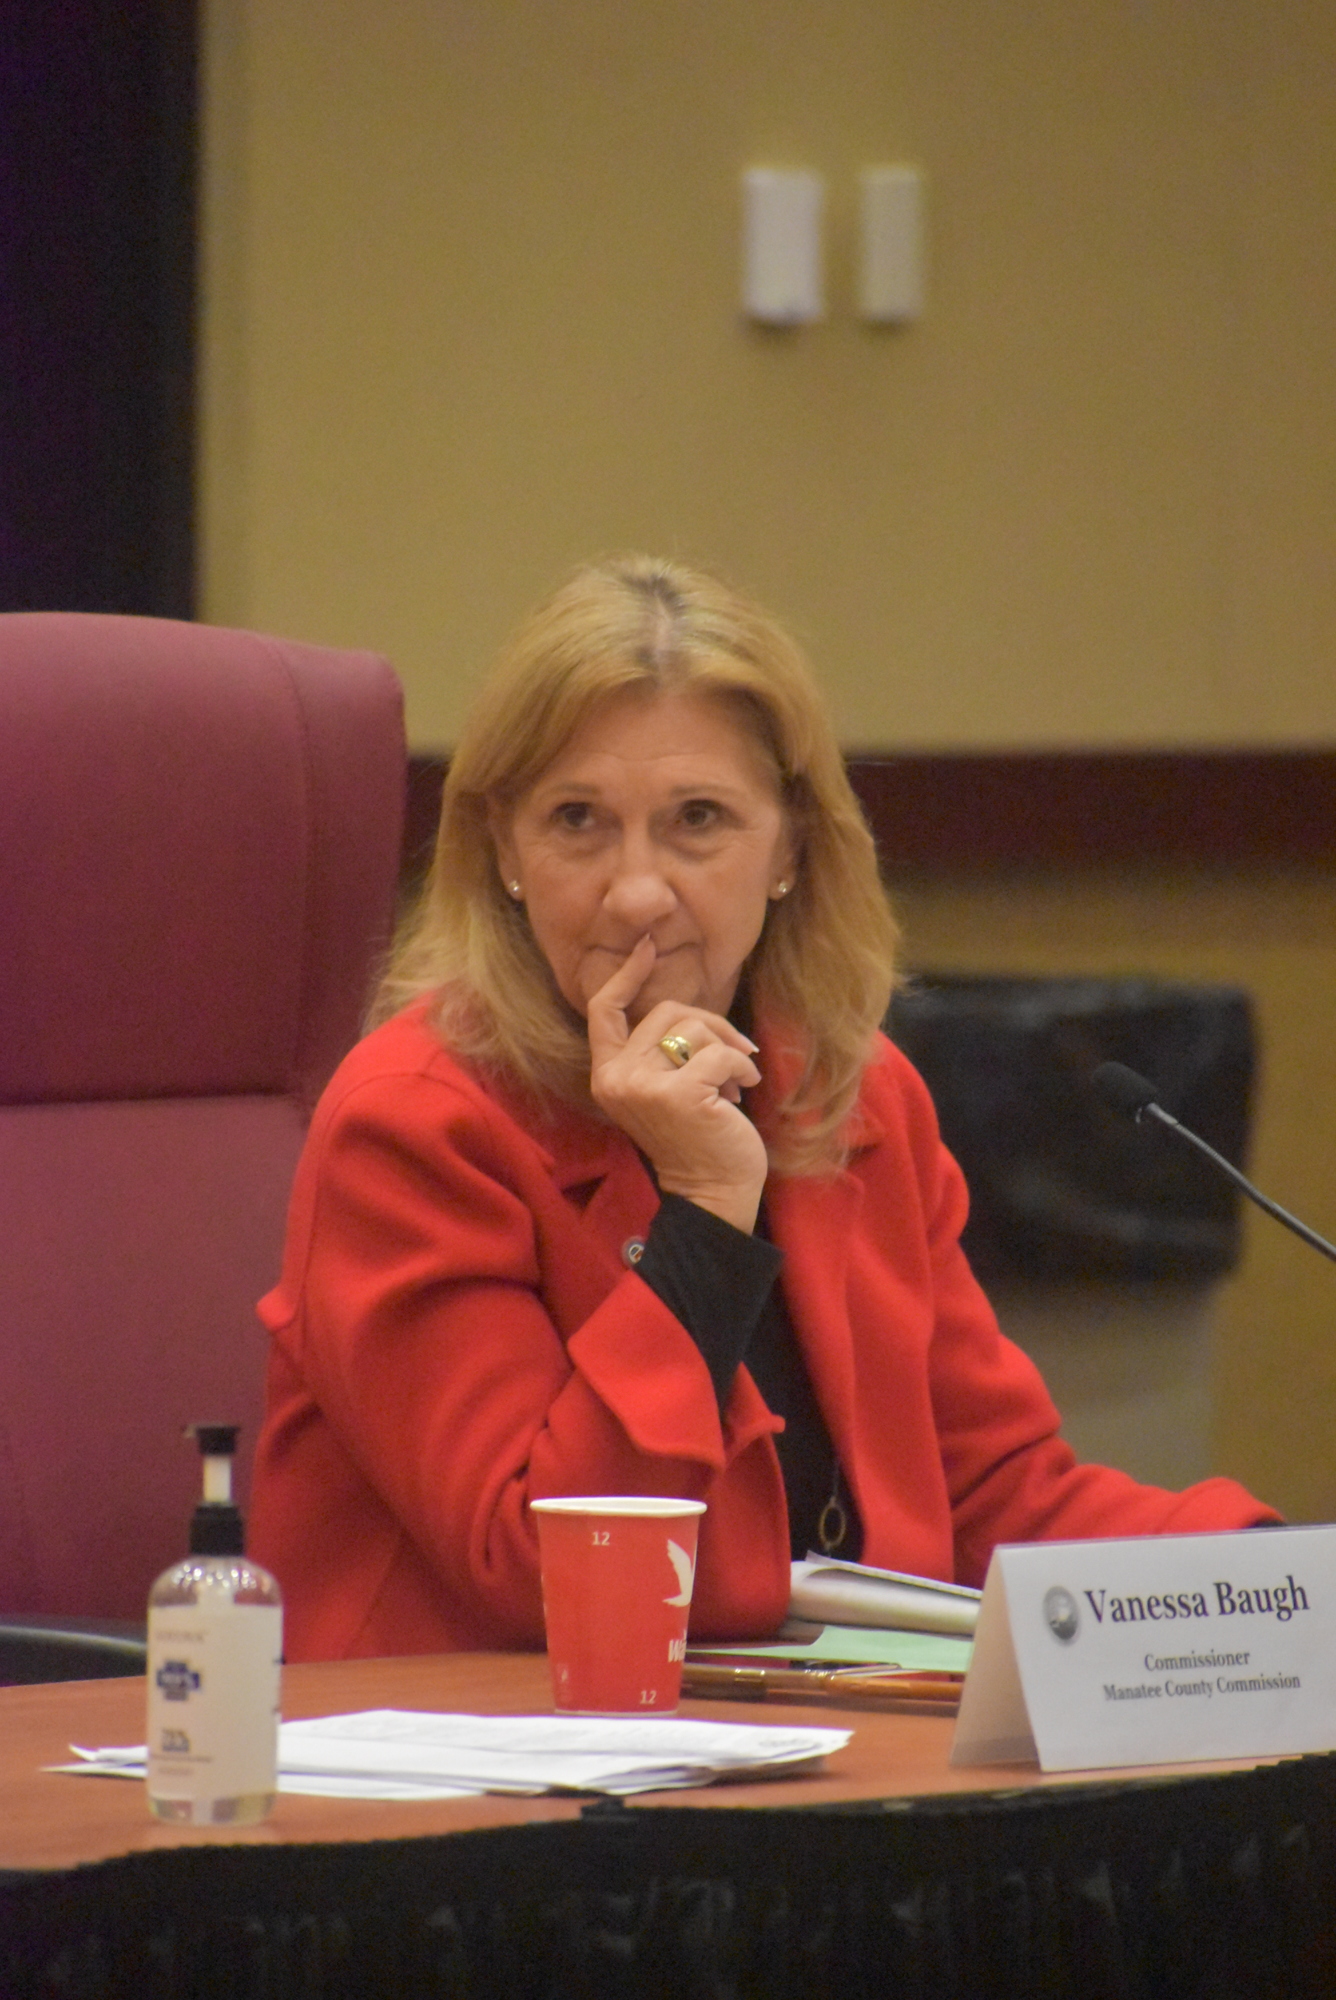 Manatee County Commissioner Vanessa Baugh said the Tara Bridge project might have made sense when it was first planned in 1989, but she thinks it would just exacerbate traffic problems in today's East County. File photo.